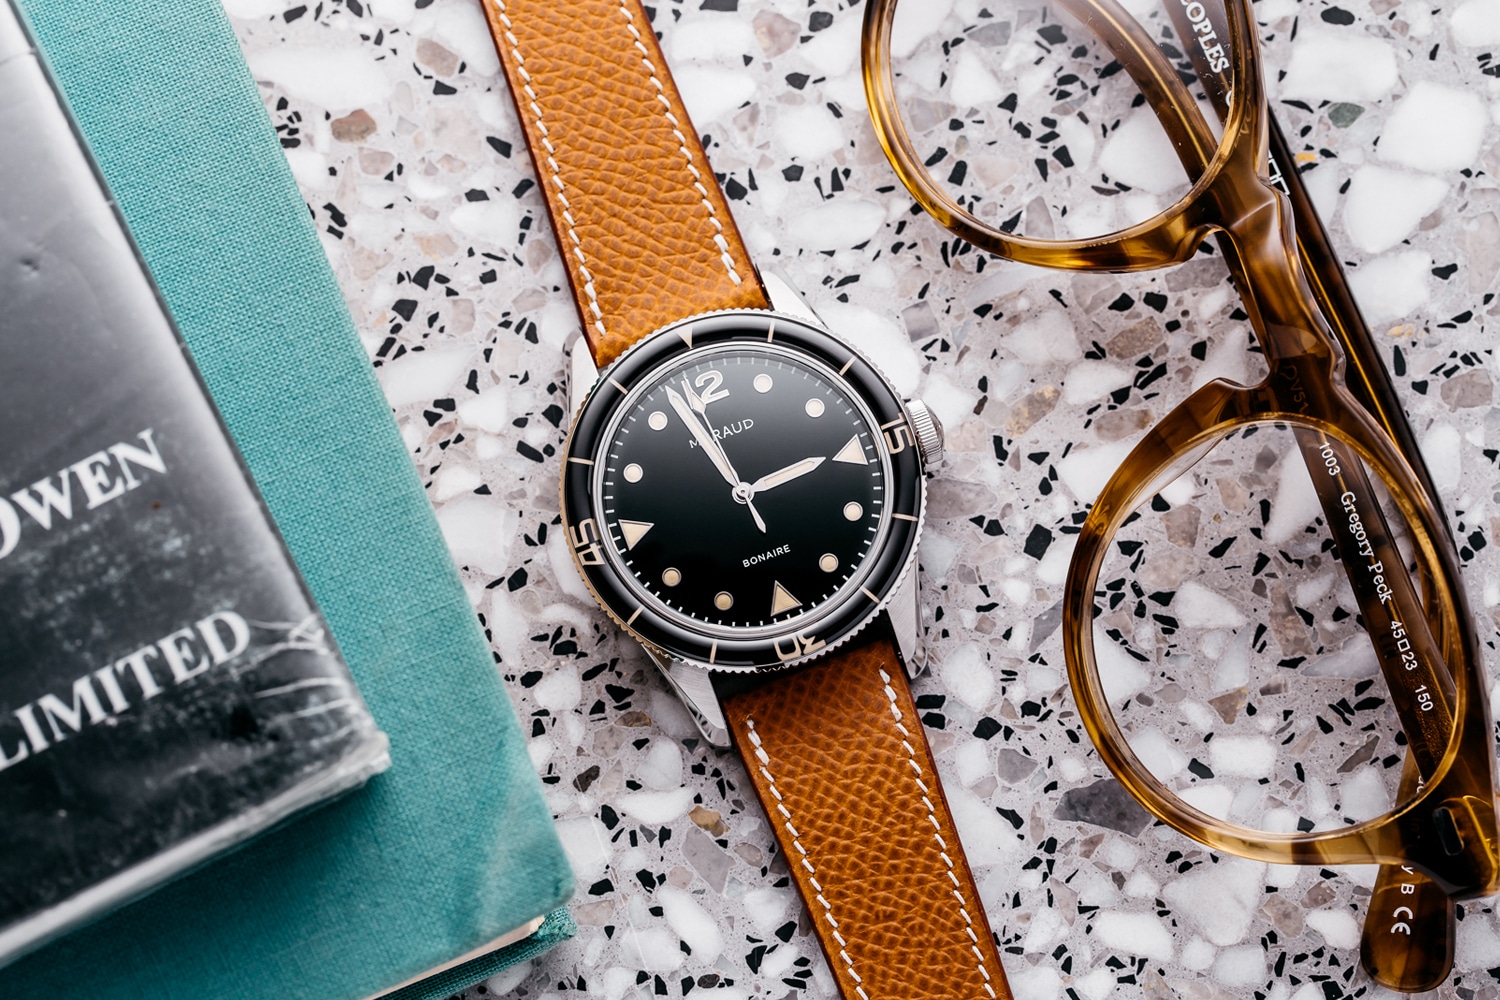 Watch up the this. Vintage inspired watches.